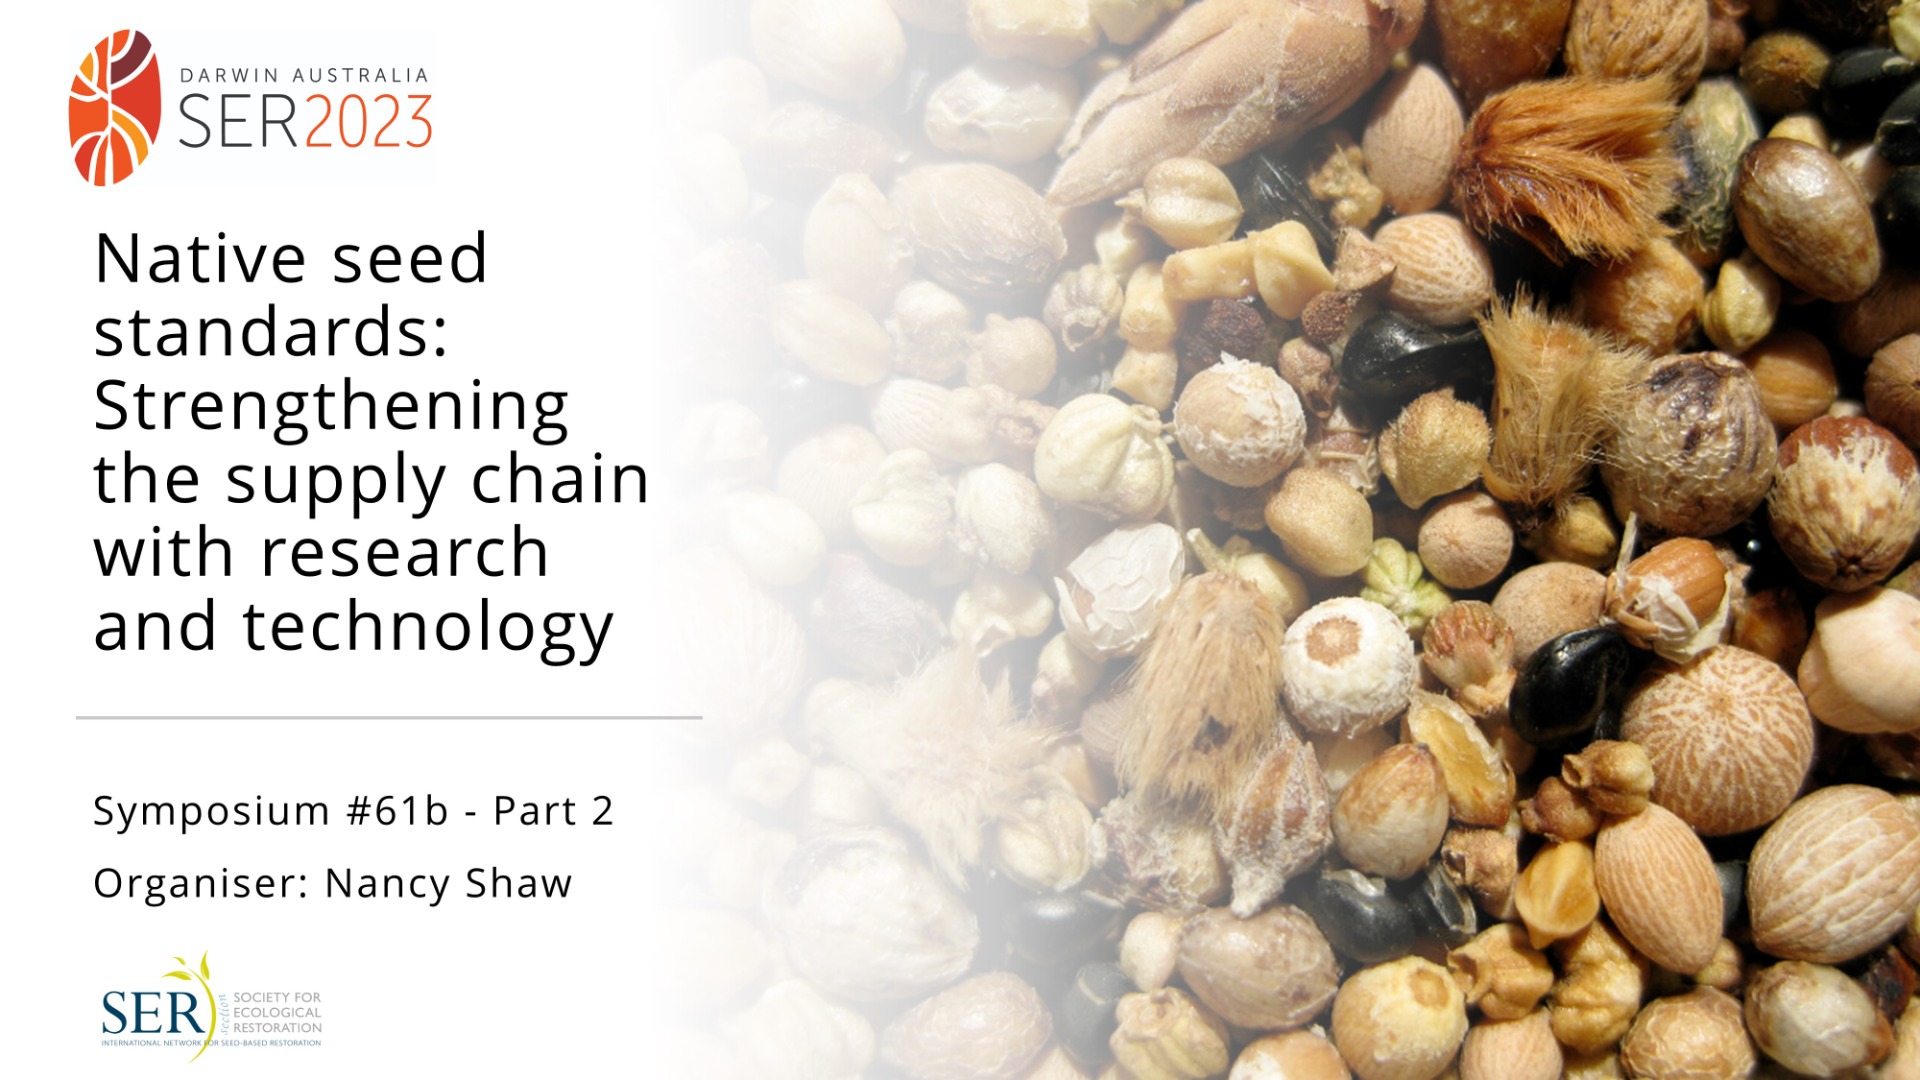 Symposium #61b Native seed standards: Strengthening the supply chain with research and technology - Part 2. Organiser: Nancy Shaw